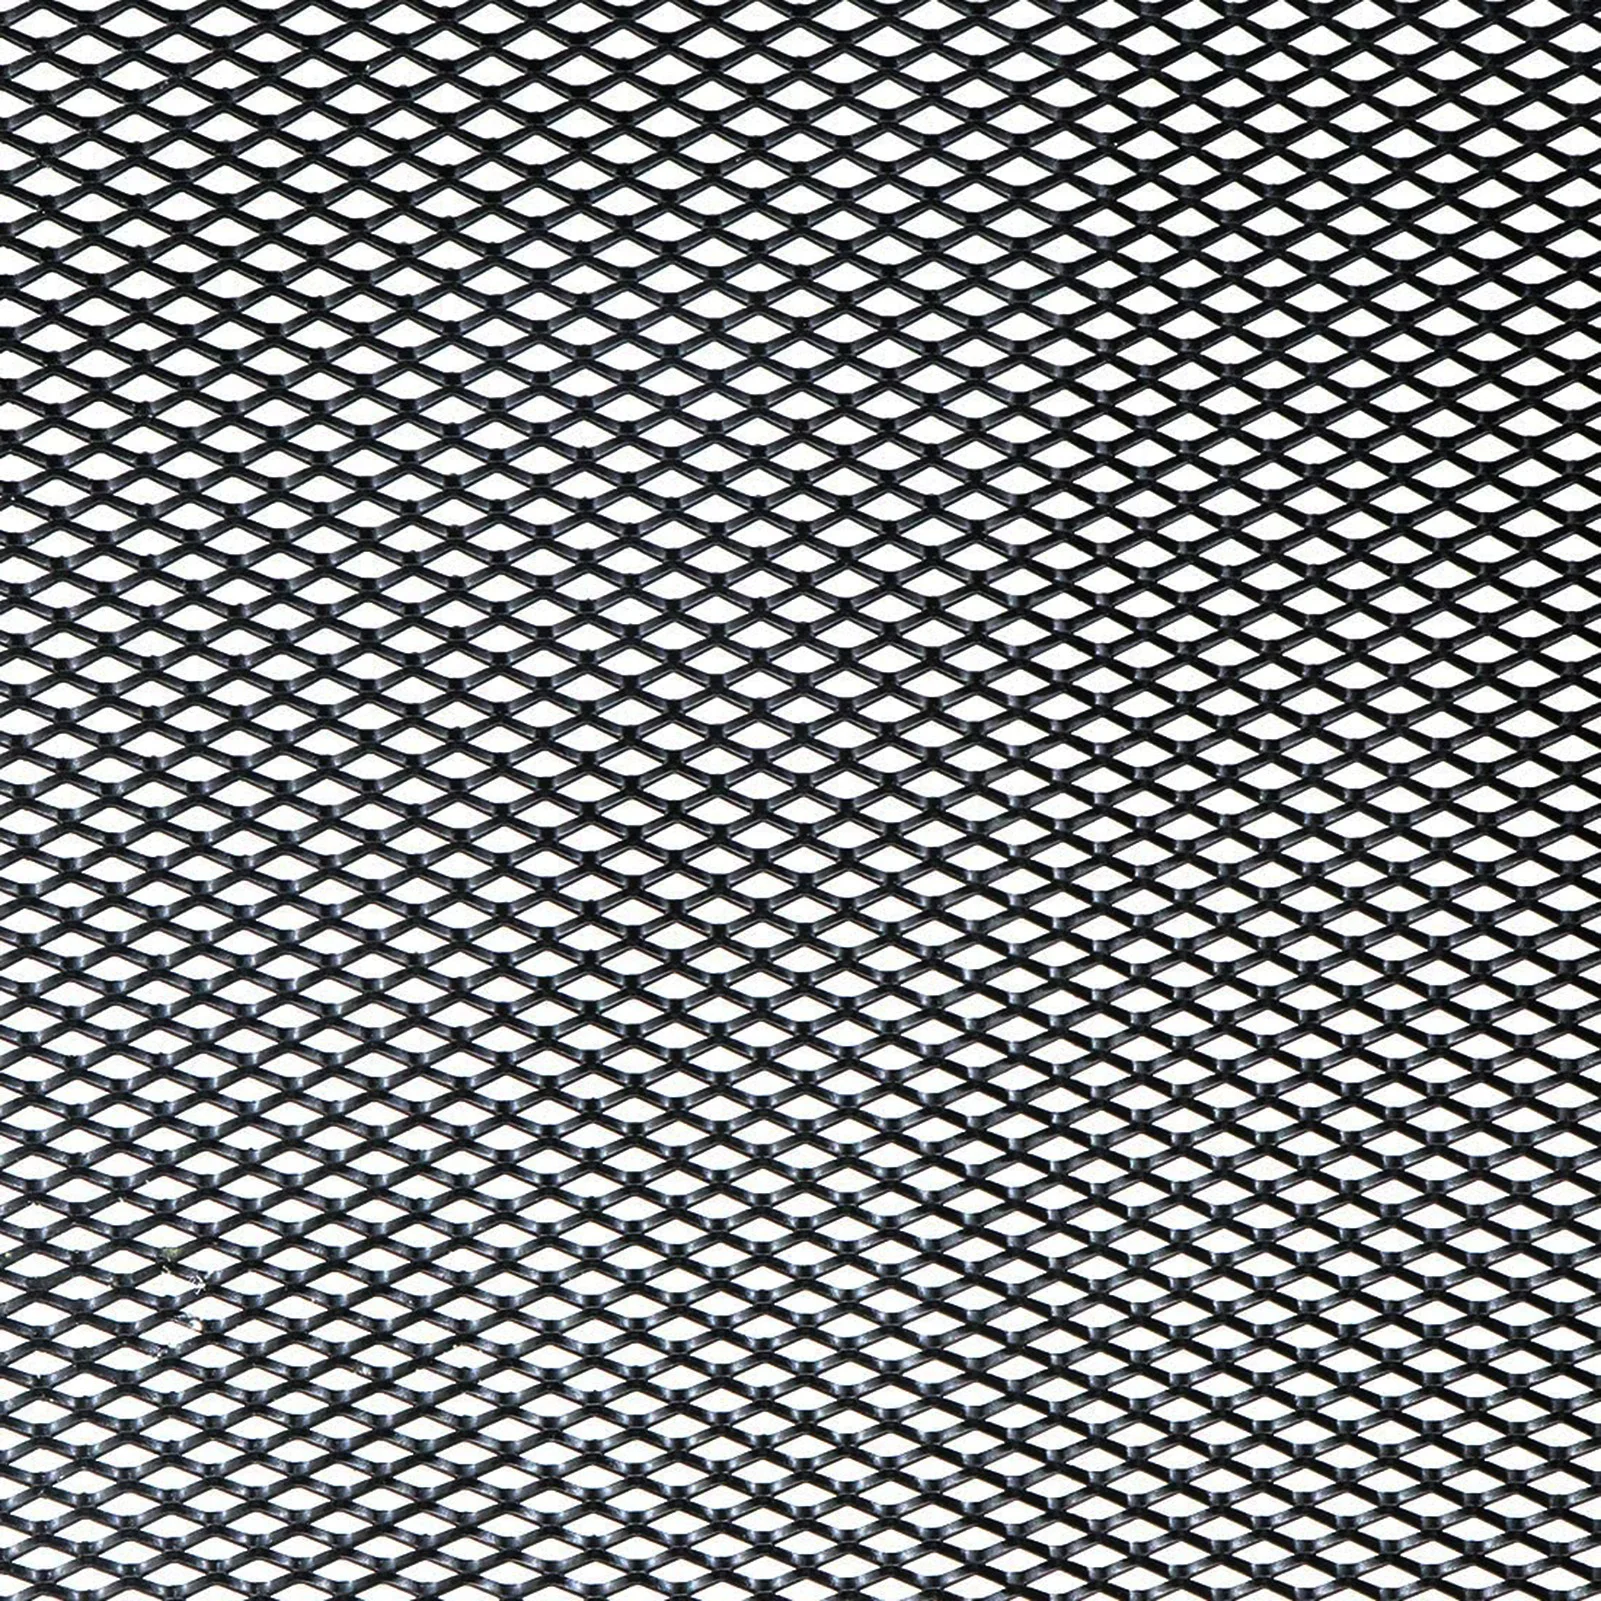 Car Grill Mesh Sheet Black Painted Aluminum Alloy Grille Mesh Roll  Automotive Grille Insert Bumper Rhombic Hole Black - AliExpress